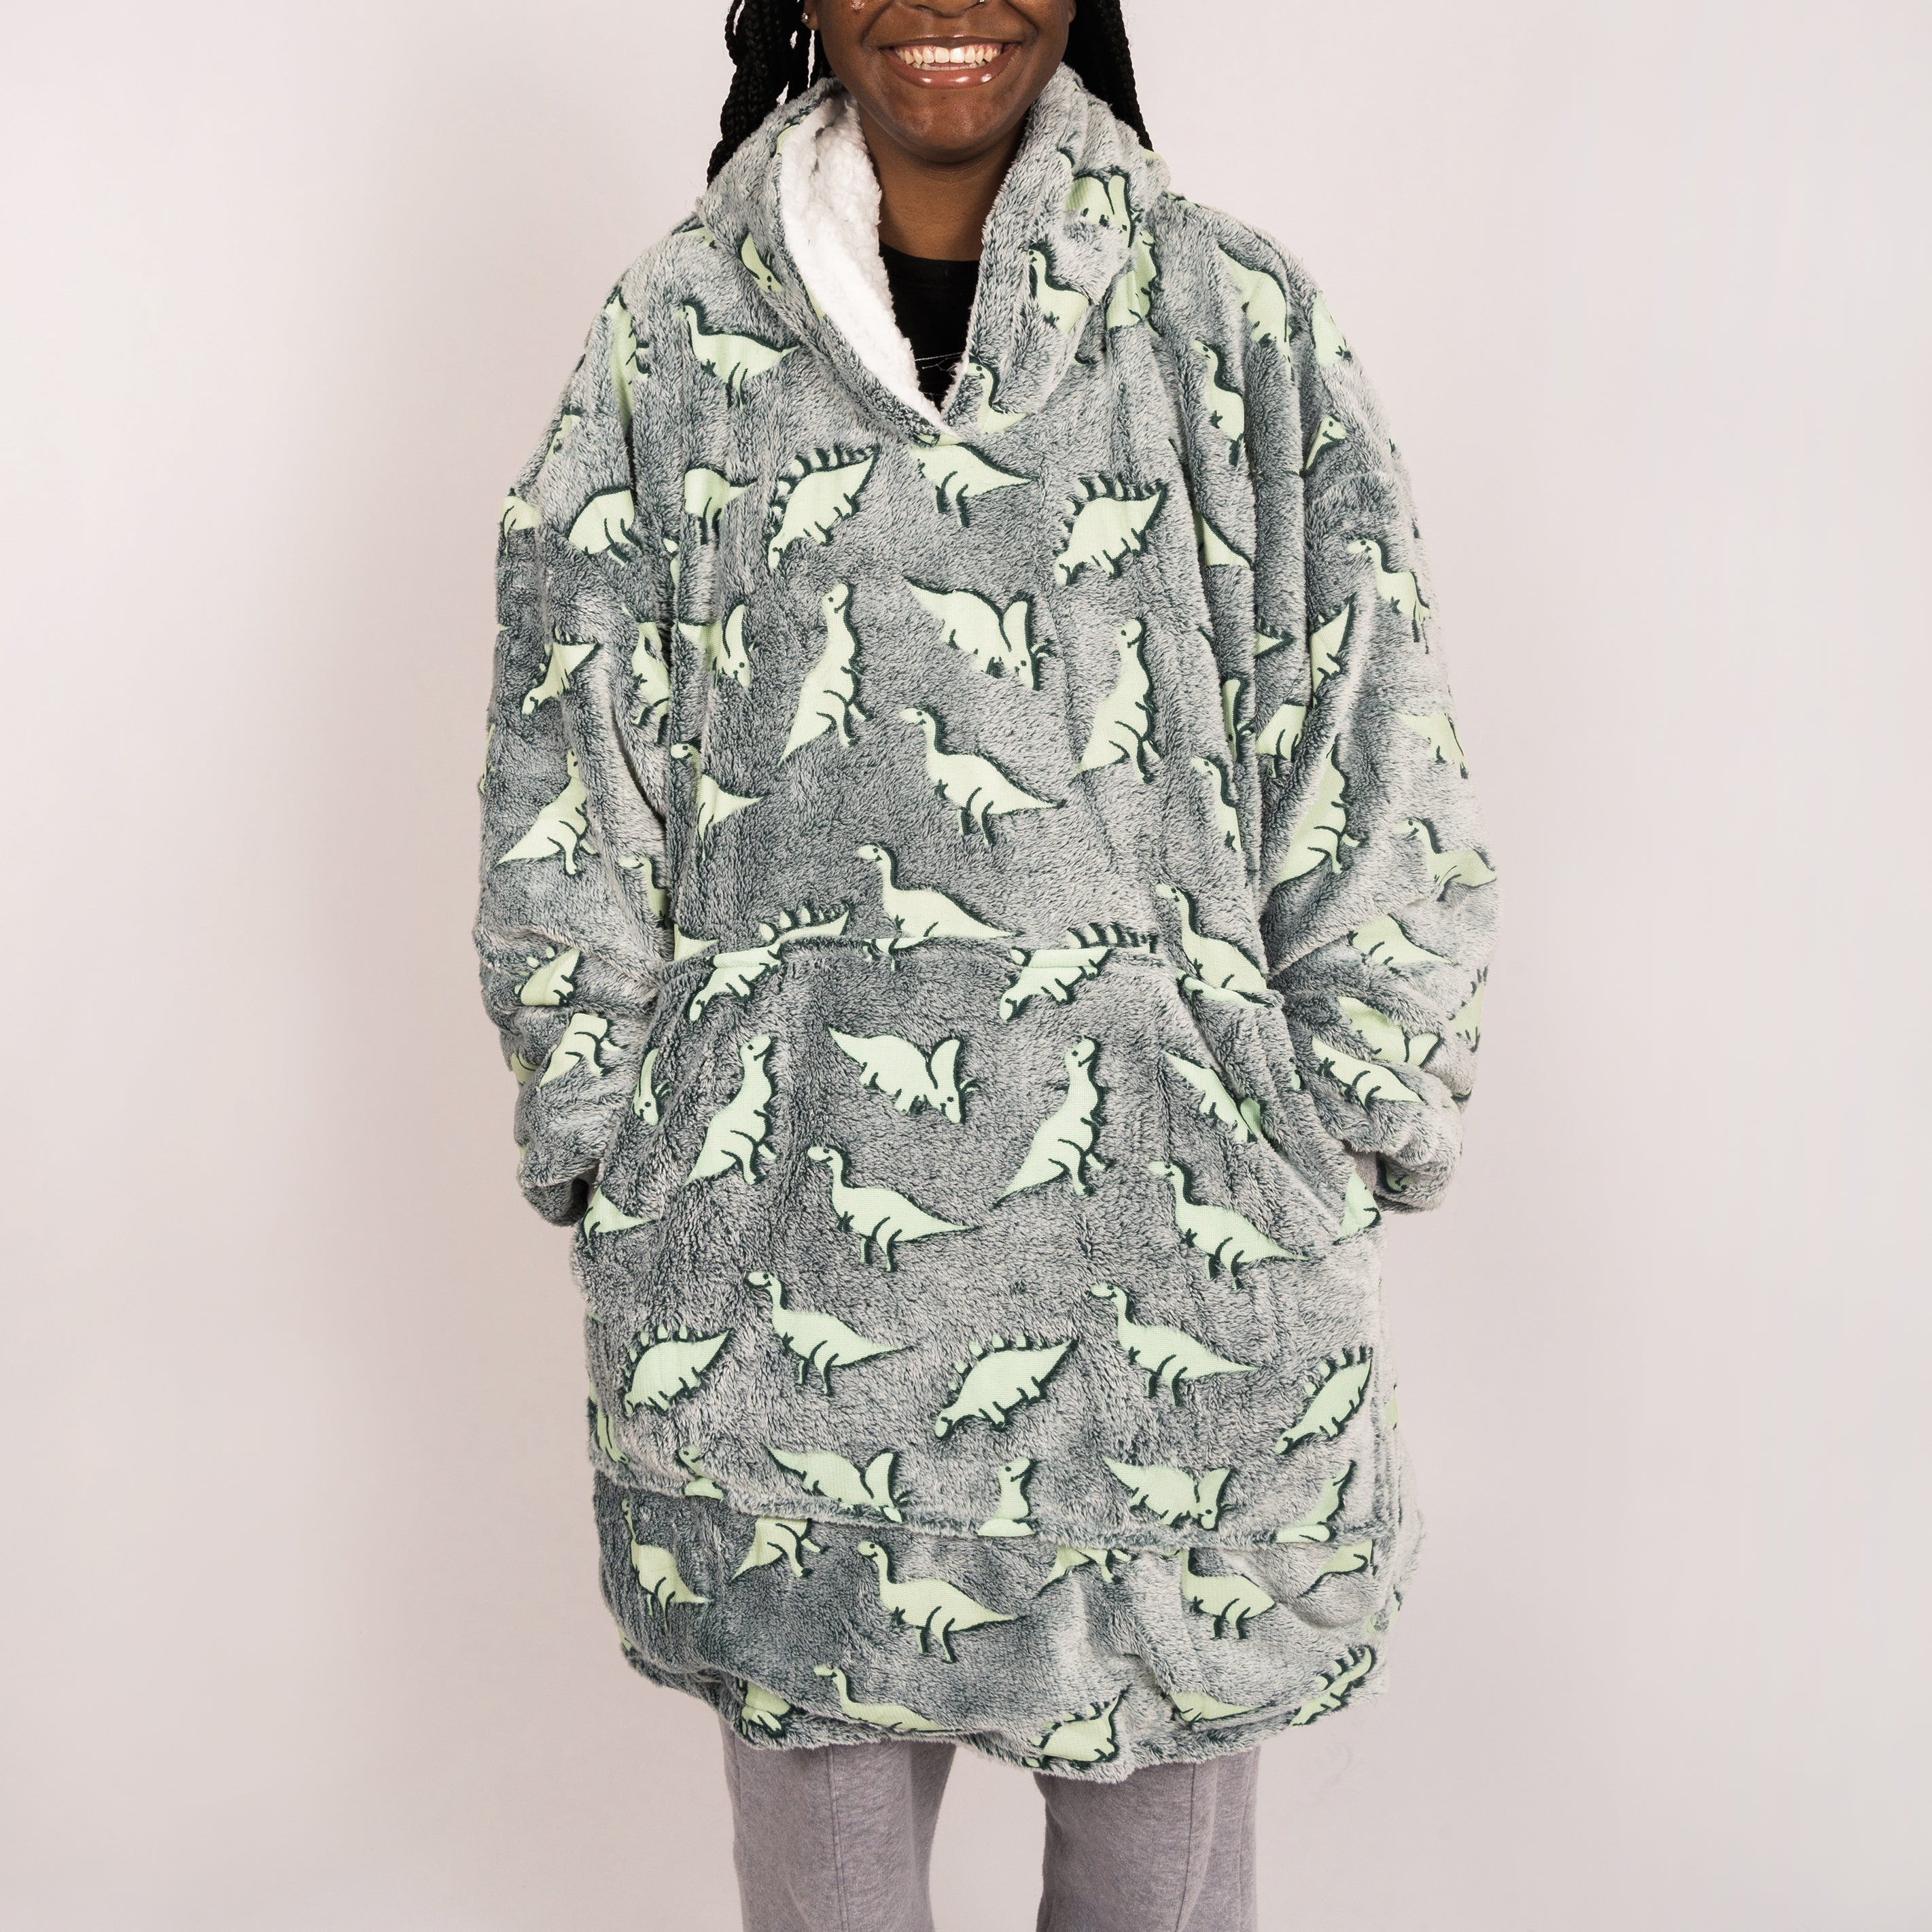 Dino Plushie with Dinosaurs Adults Blanket Hoodie